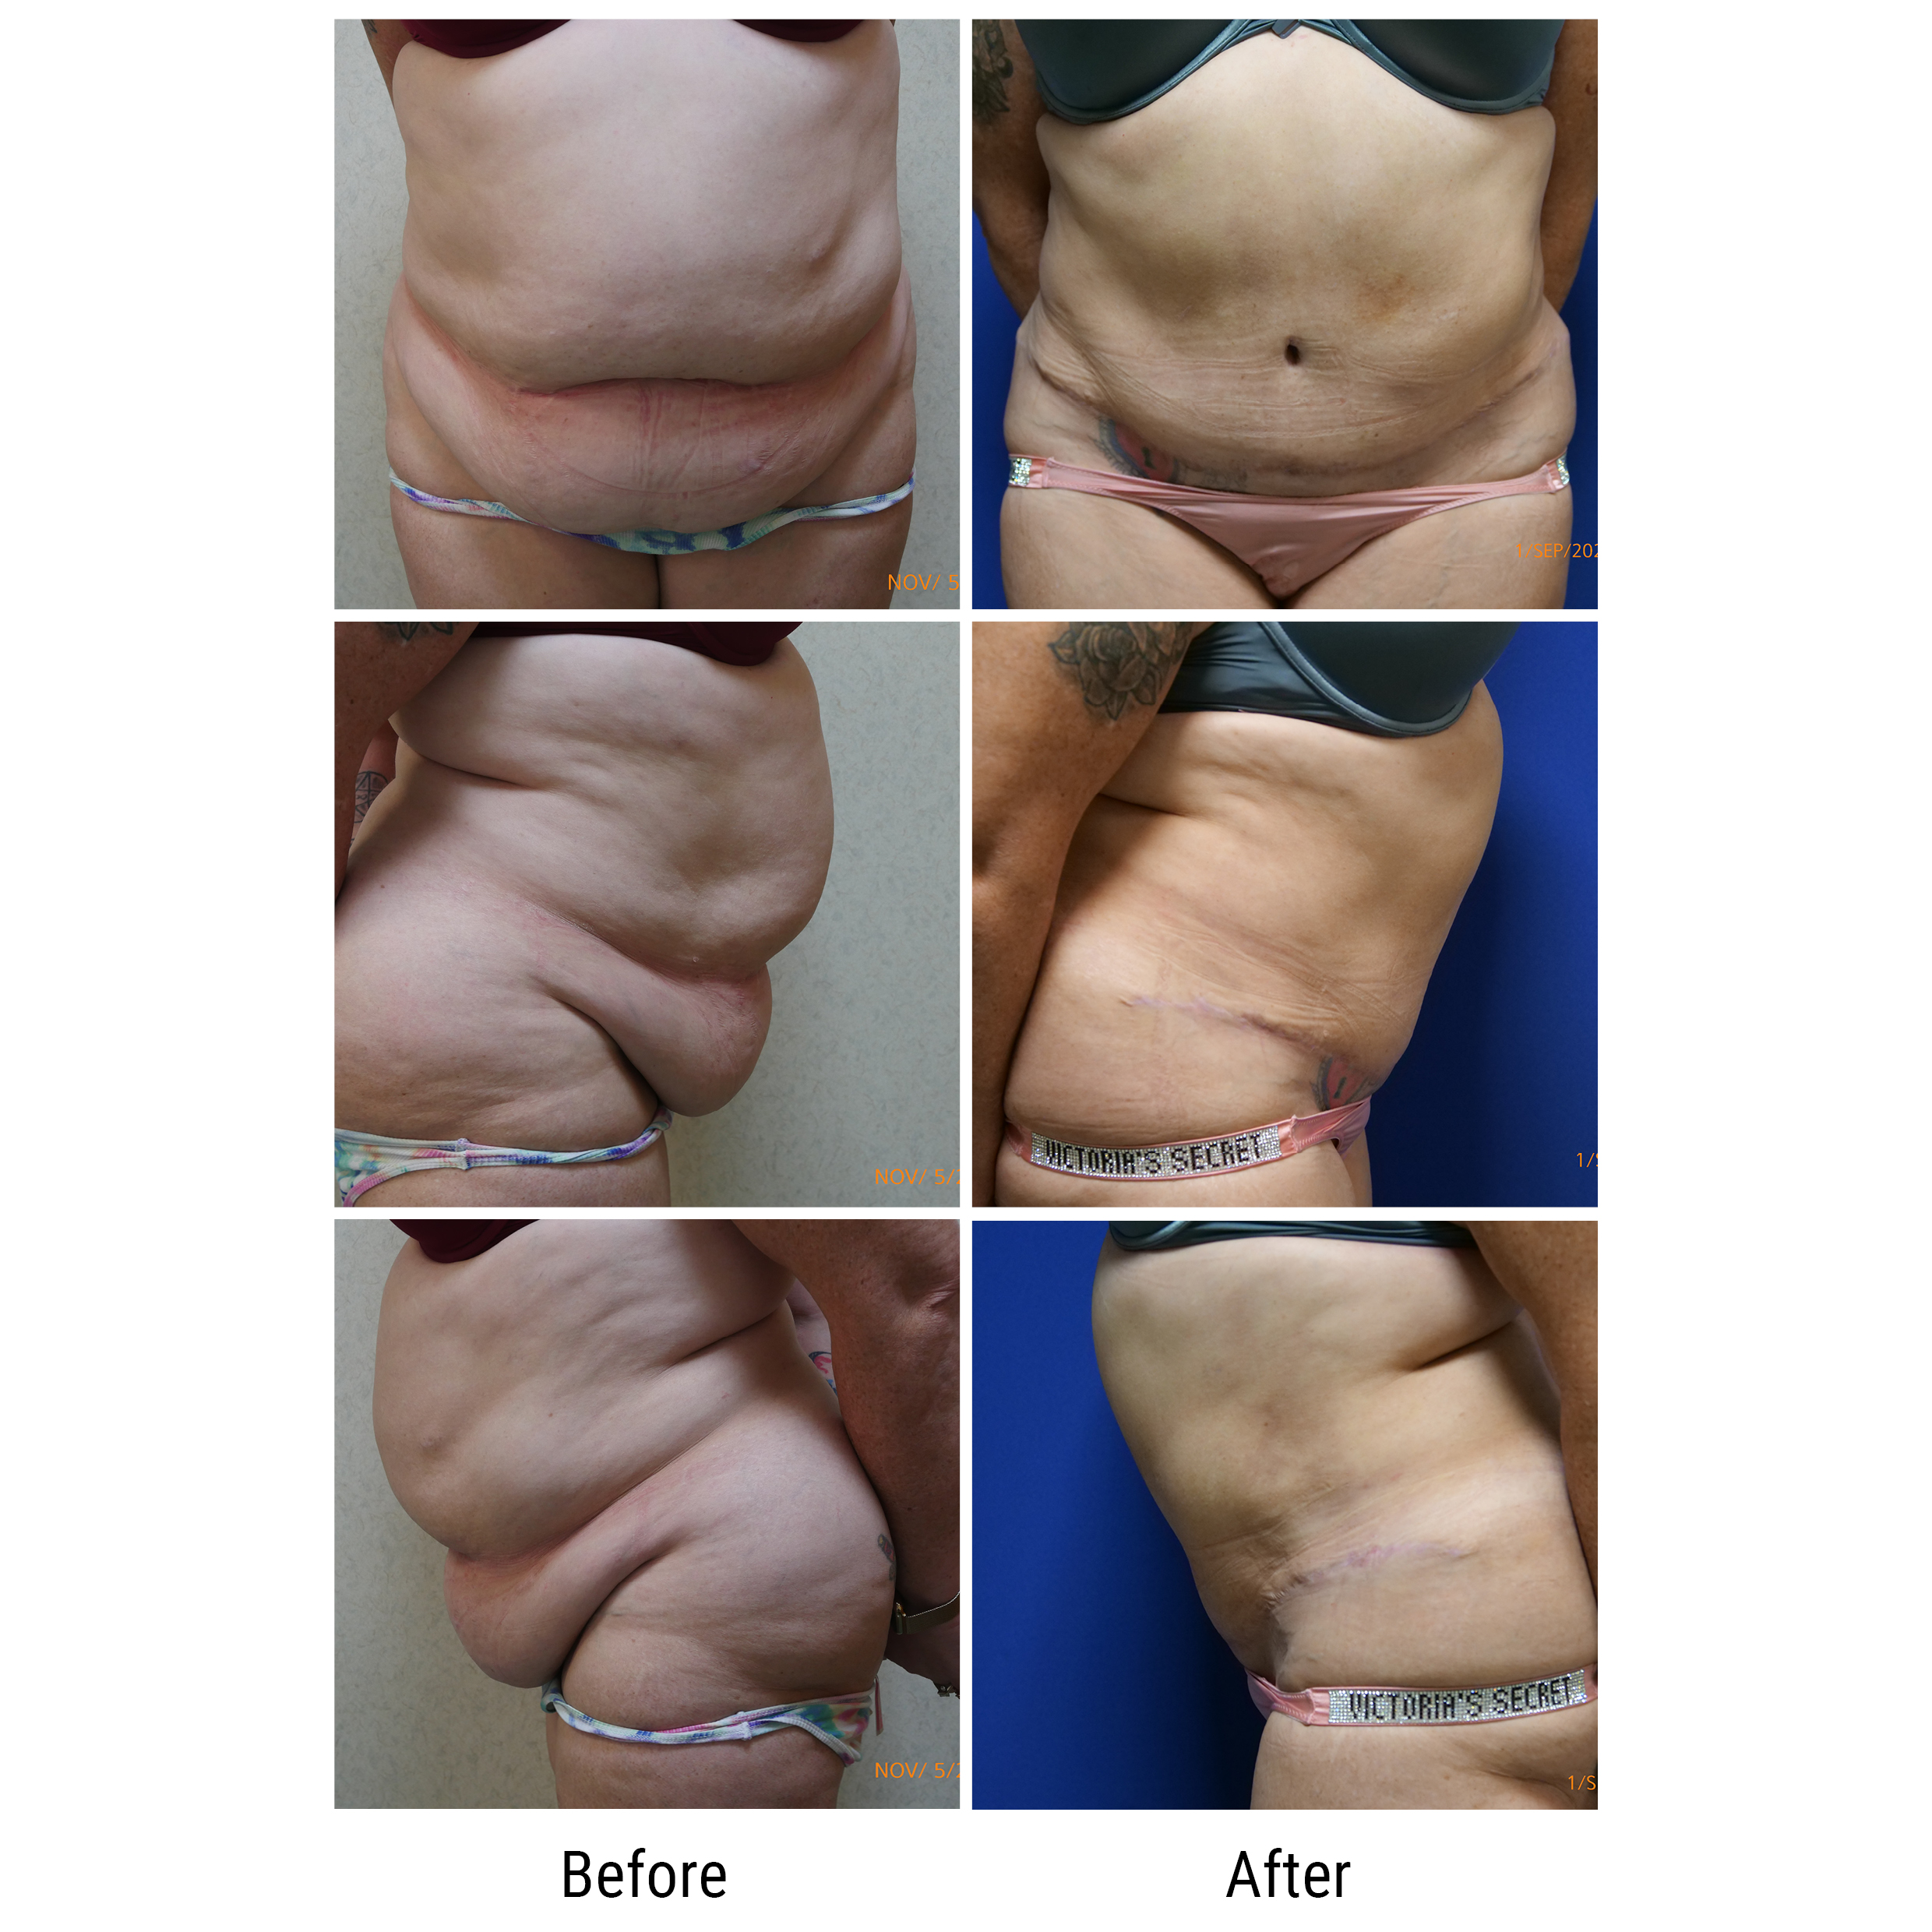 dermatology and surgery associates tummy tuck liposuction before and after bronx ny